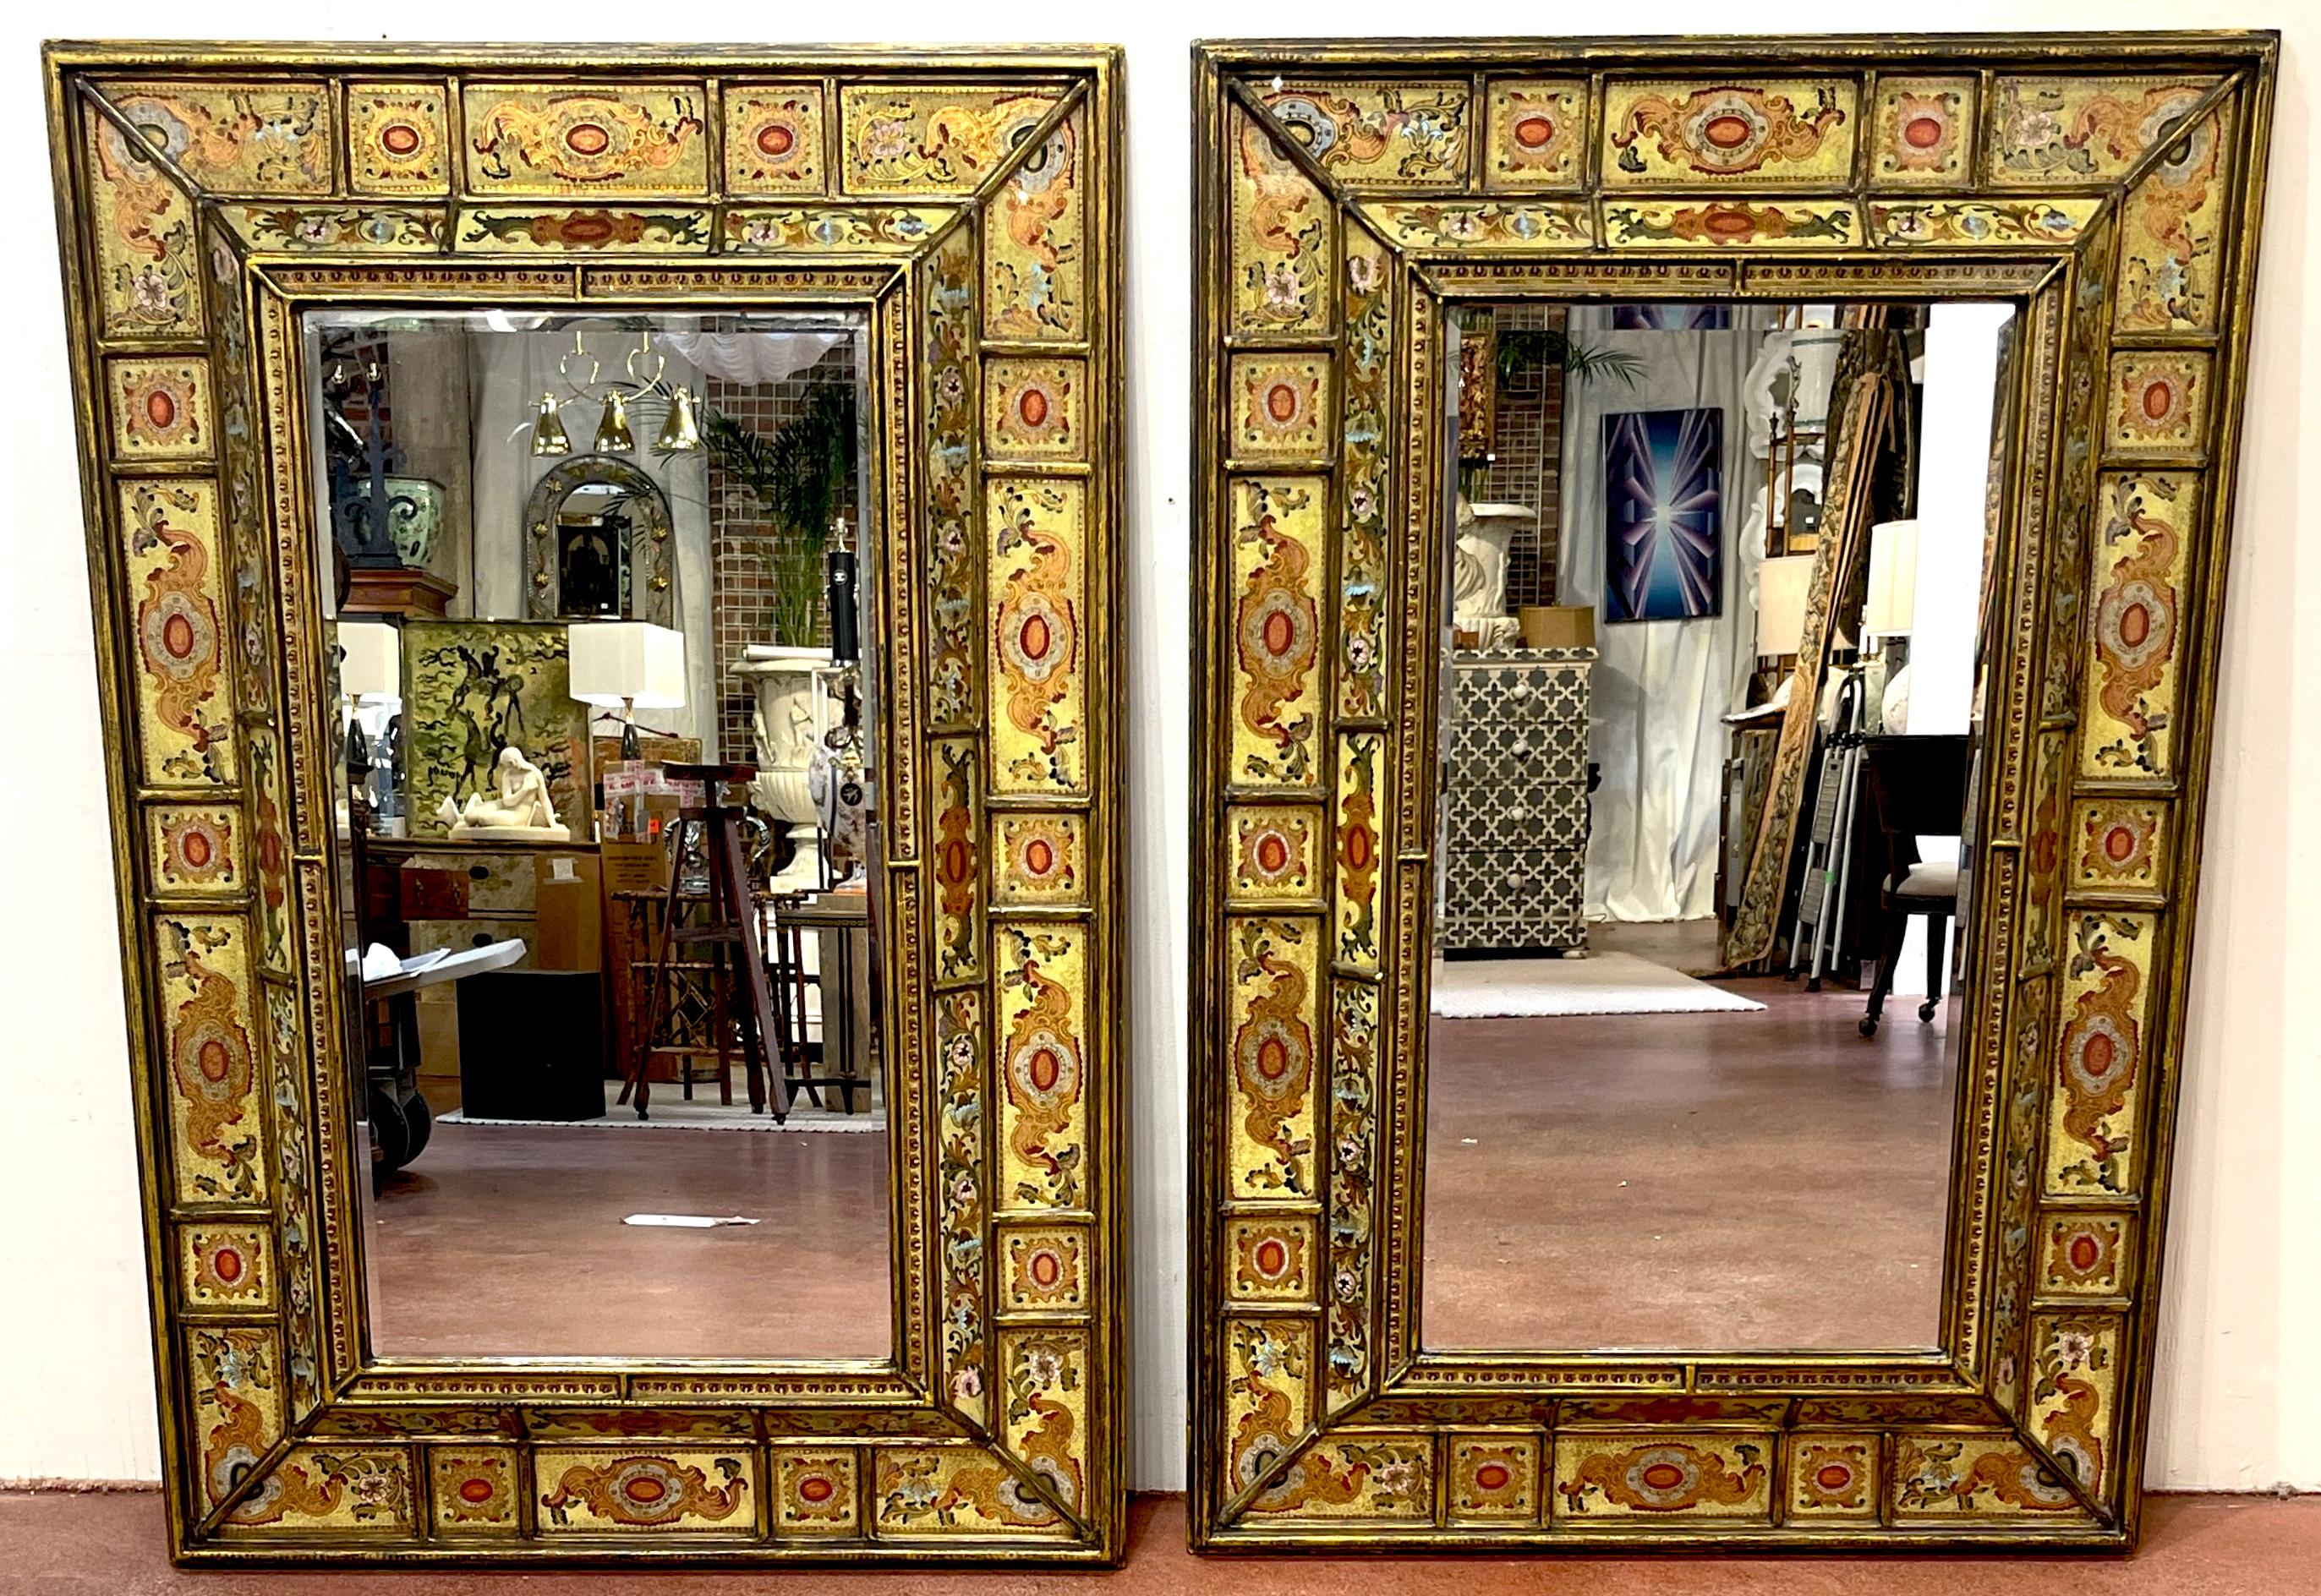 Pair of Large Spanish Colonial Eglomise Giltwood Mirrors 
Peru, Later 20th Century 

A magnificent pair of Spanish Colonial Eglomise Giltwood Mirrors, originating from Peru in the later 20th century. These mirrors exemplify the grandeur and